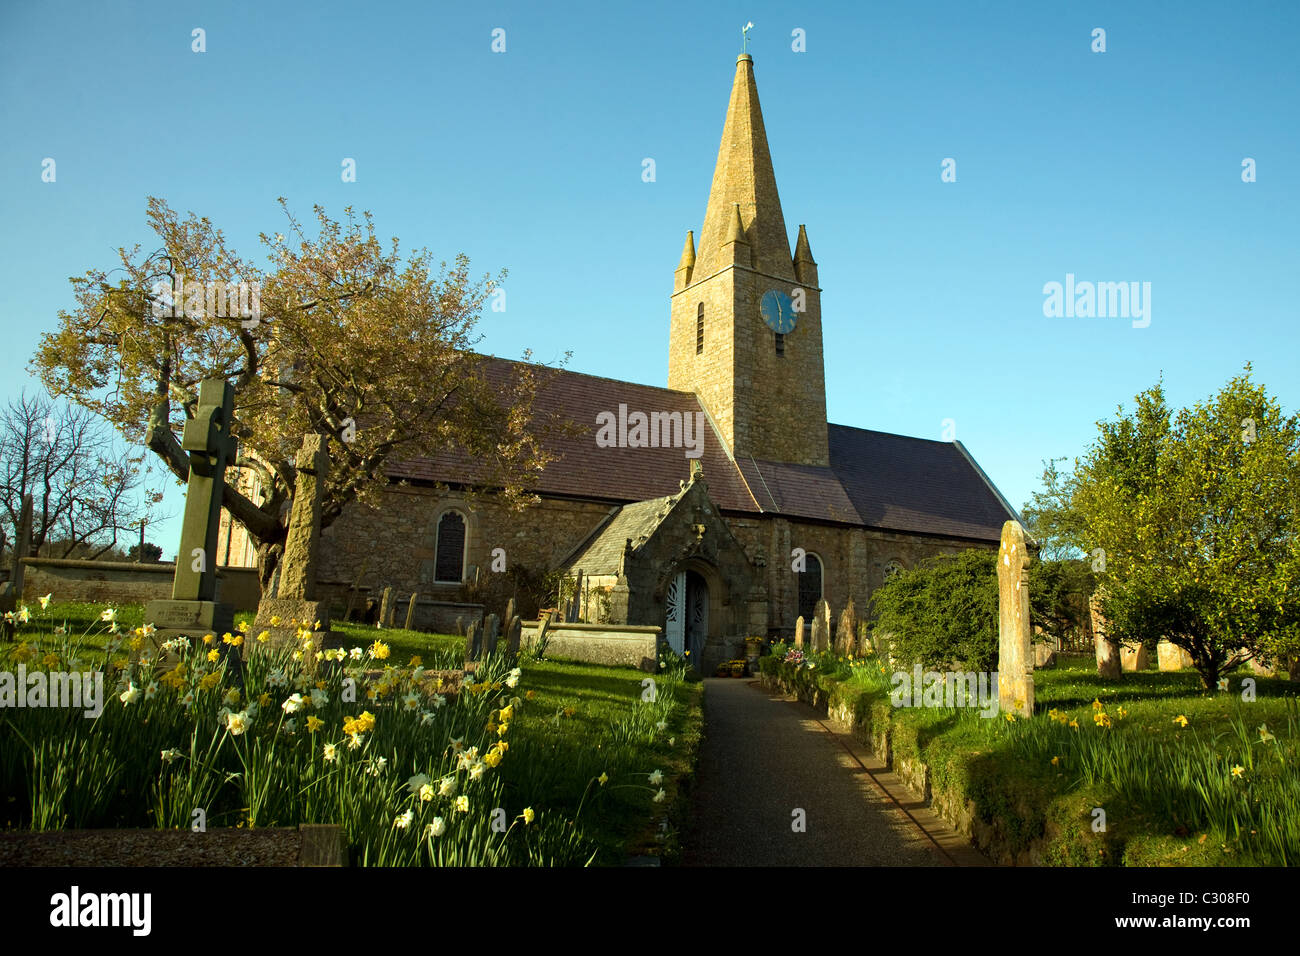 St Martin's chiesa parrocchiale a Guernsey Isole del Canale Foto Stock